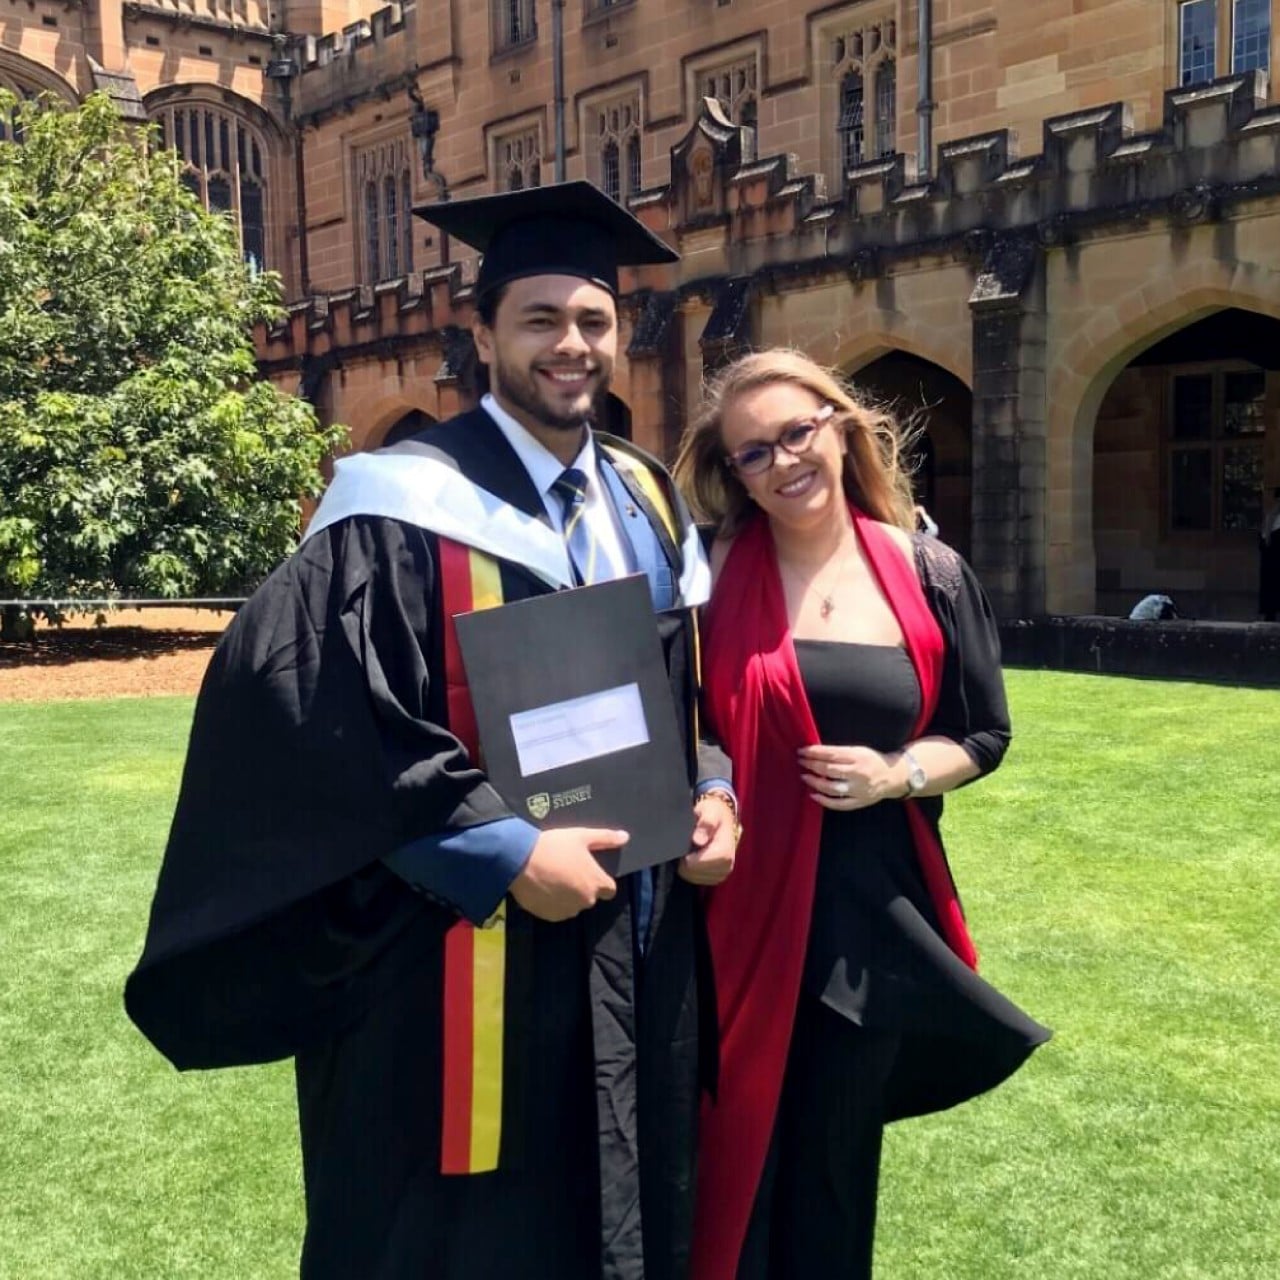 Patrick Lucarnus in his graduation holding his degree certificate, standing with a woman, on the grass in the University of Sydney's Main Quadrangle.